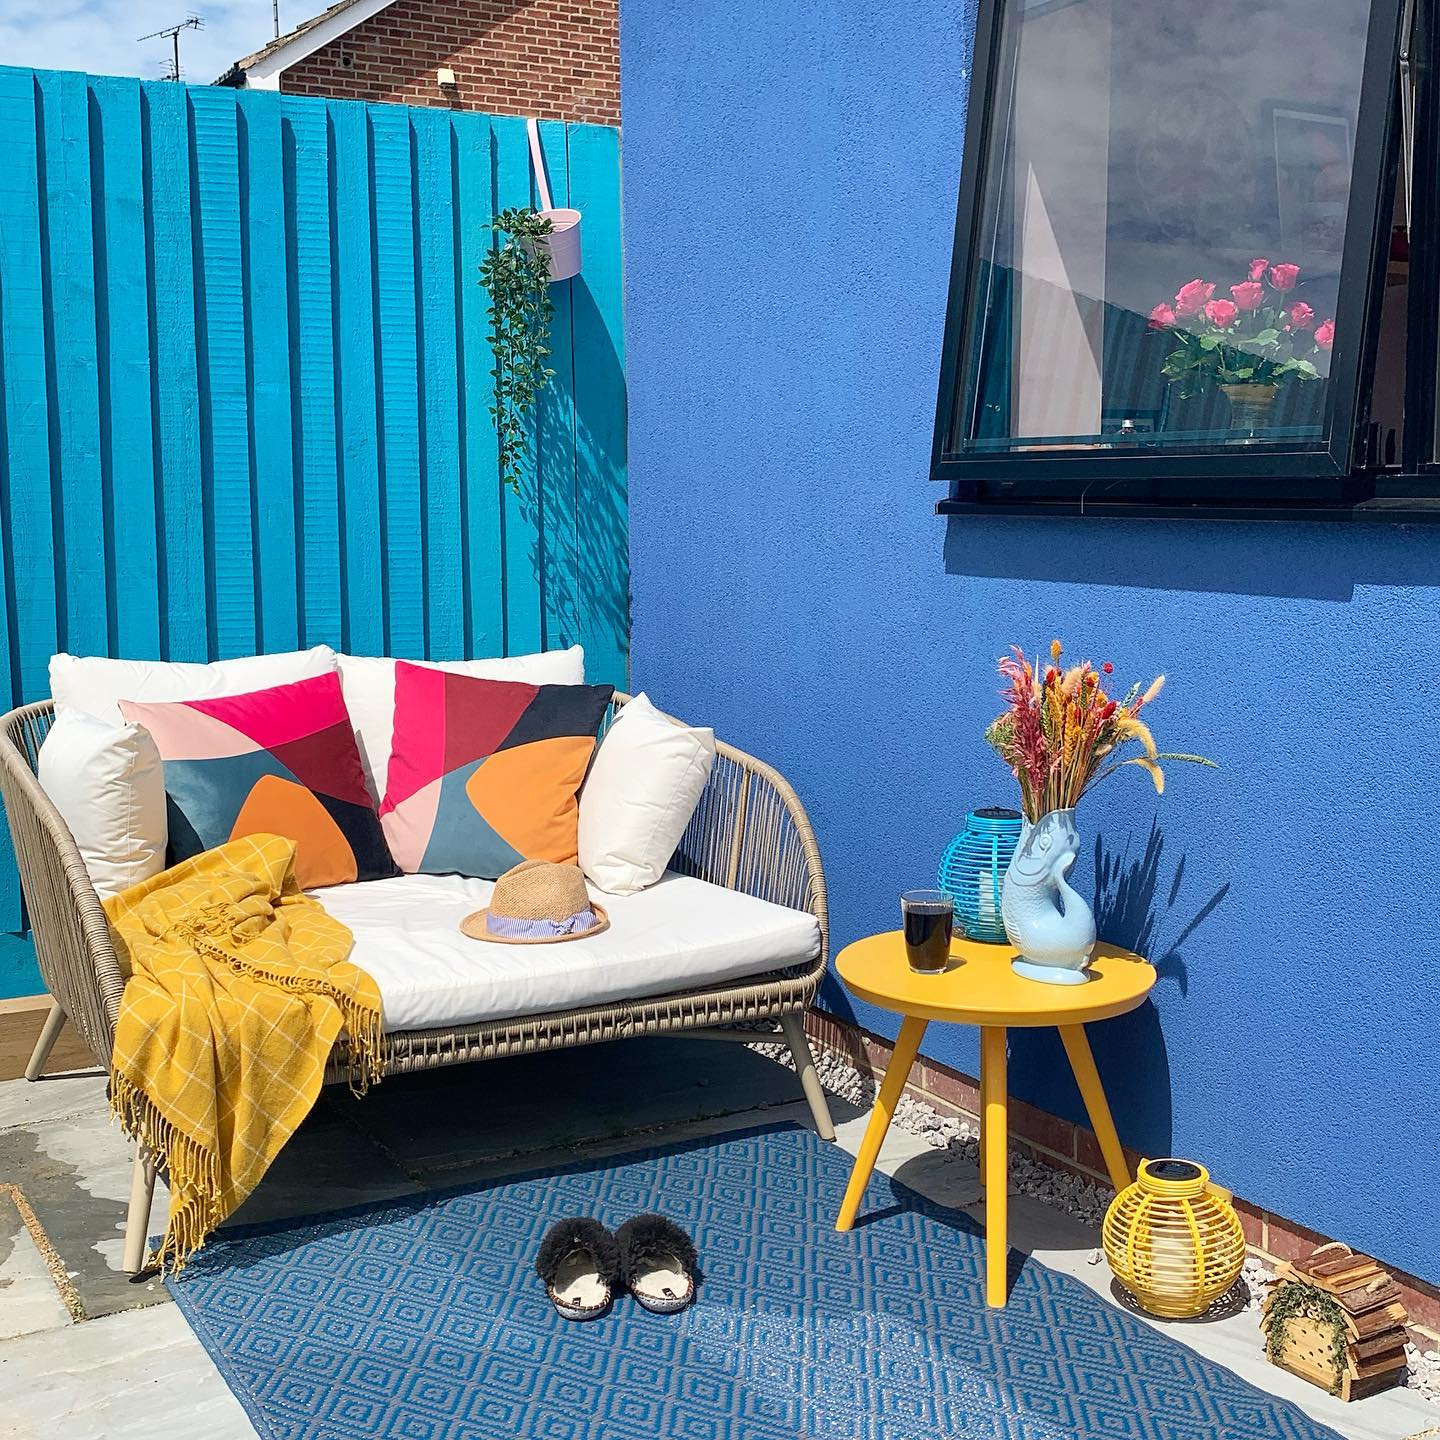 A backyard patio next to a bright blue fence decorated with a blue wall, and colorful pillows. Photo by Instagram user @carries_colourful_casa